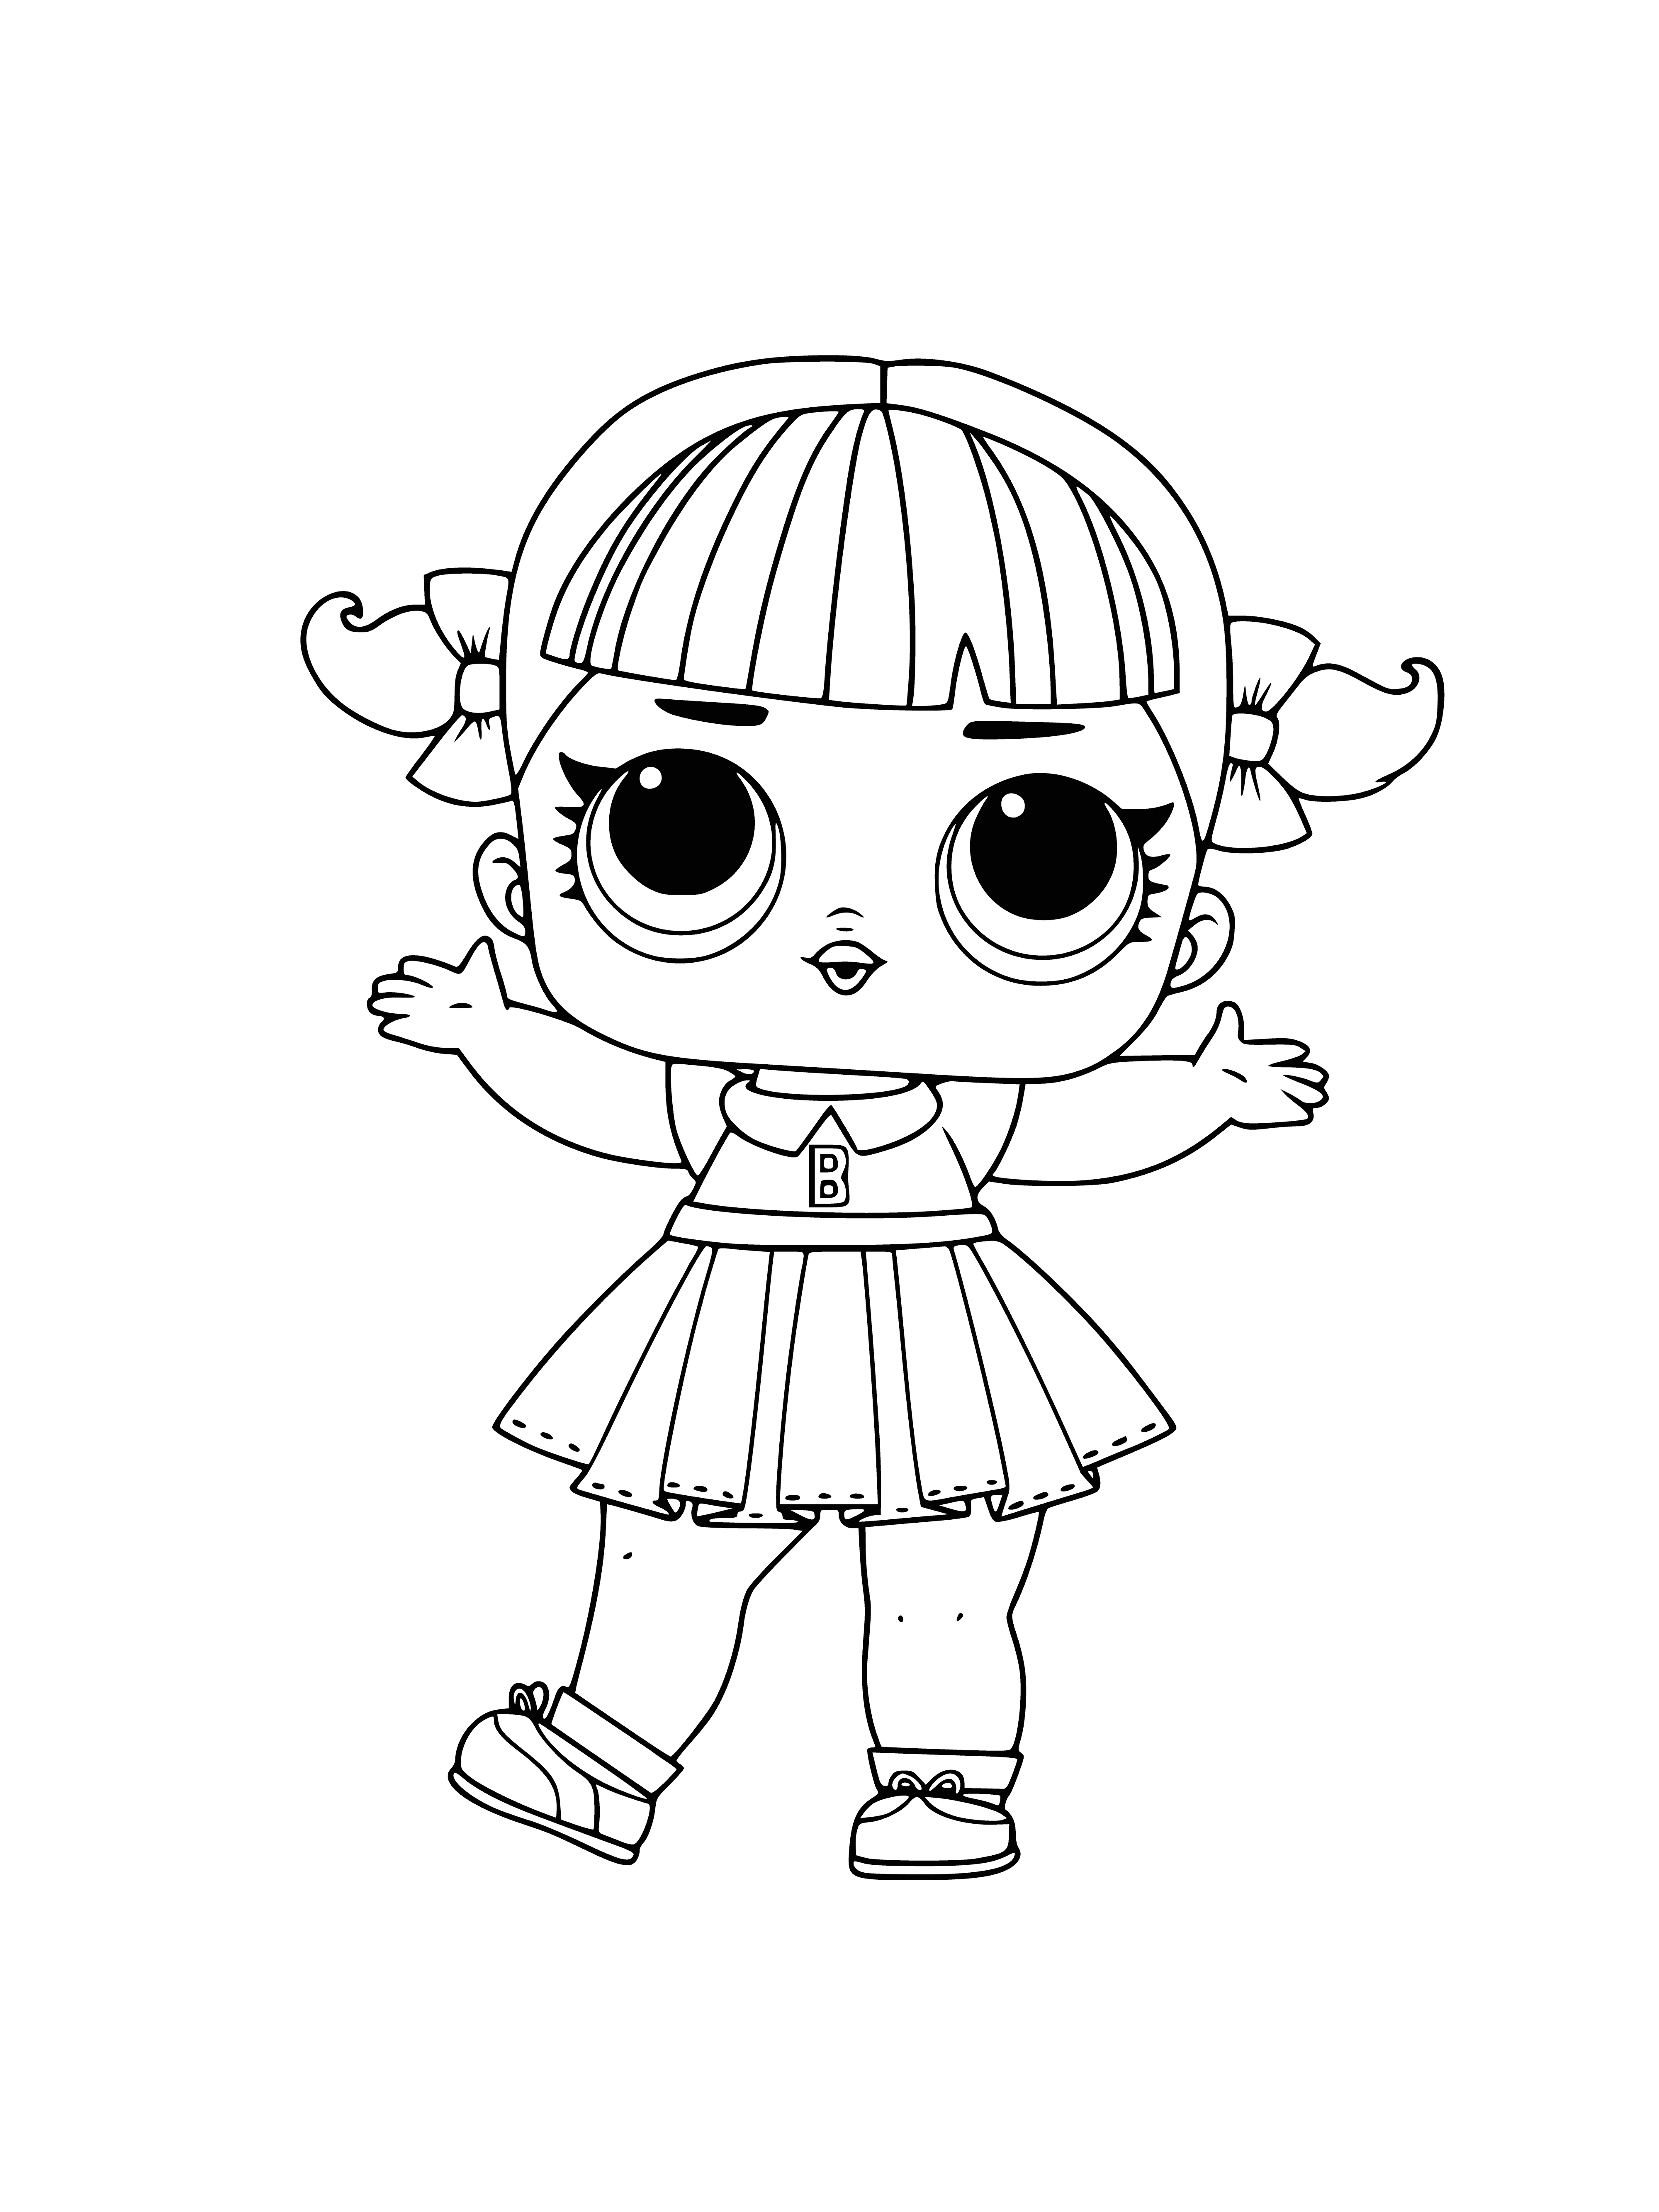 LOL Cheer Captain episode 1 coloring page